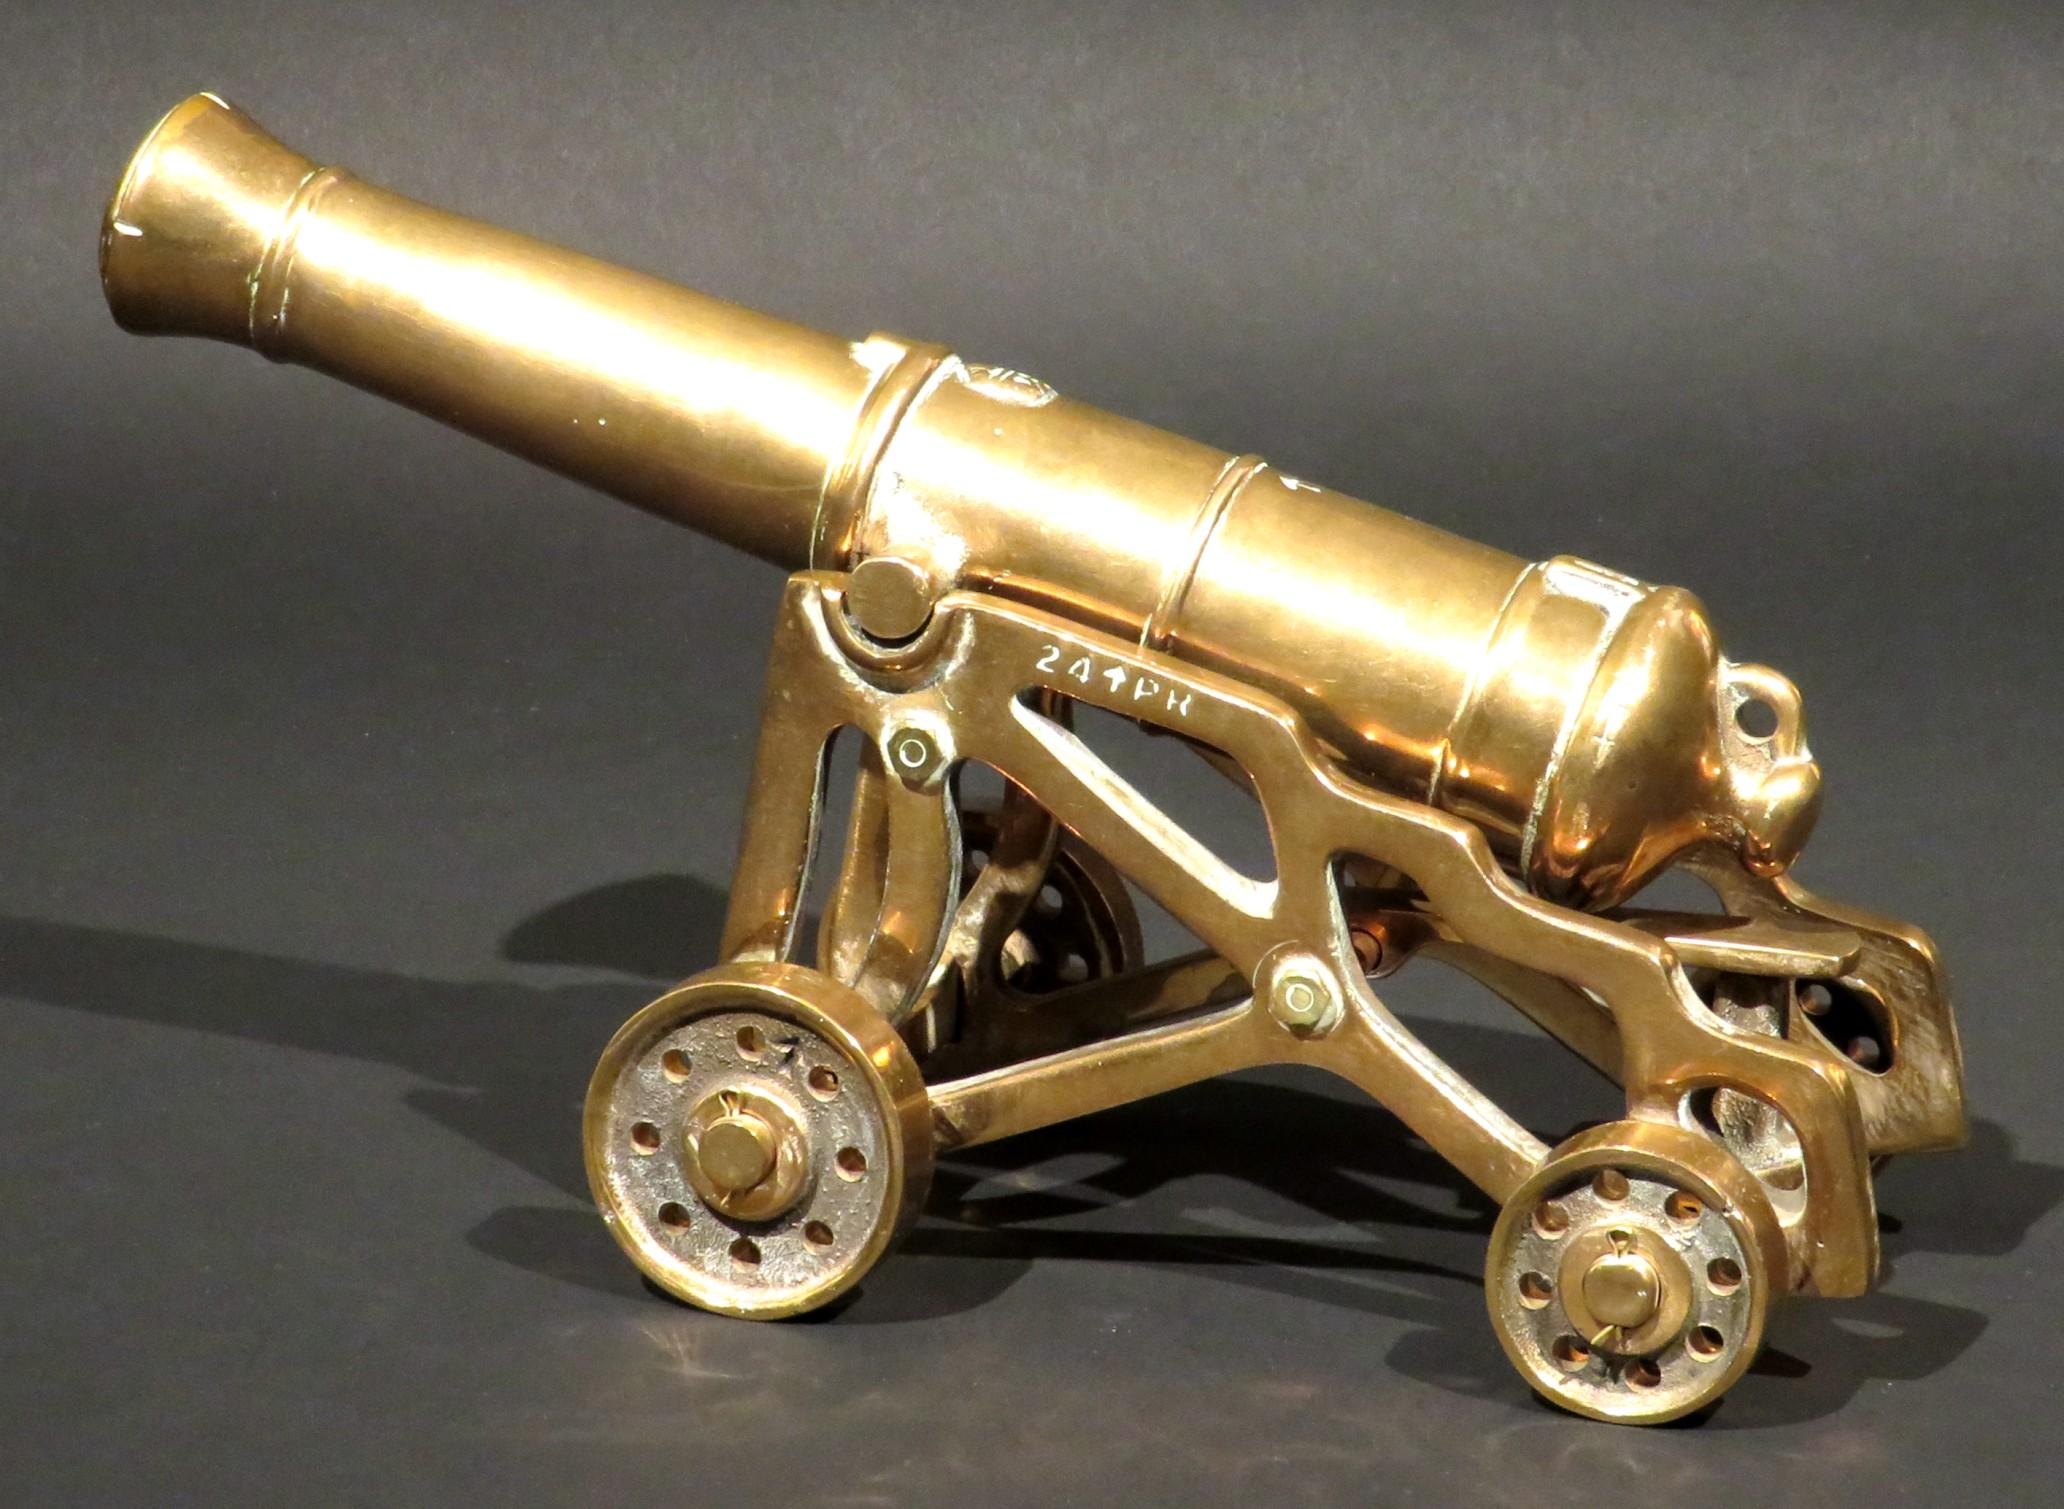 A finely cast model of an early 19th century British 24-pounder smoothbore muzzle-loading artillery cannon, together with its garrison style carriage. 
Both cast in heavy gauge 'bell metal', the gun is accurately represented with the Royal Cypher of